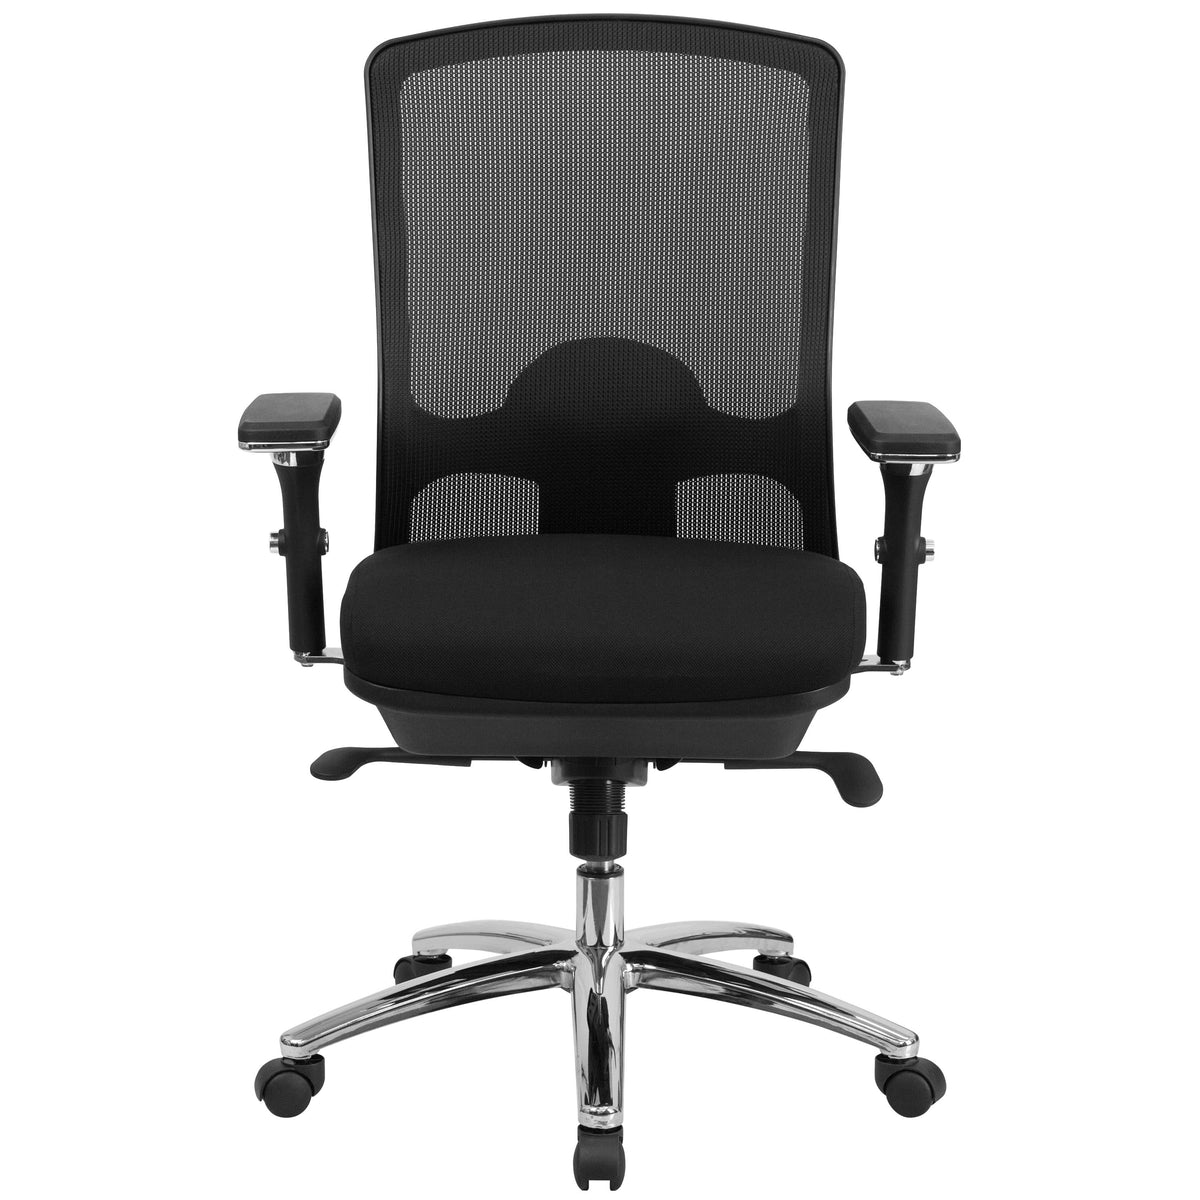 24/7 Intensive Use Big & Tall 350 lb. Rated Black Mesh Multifunction Chair